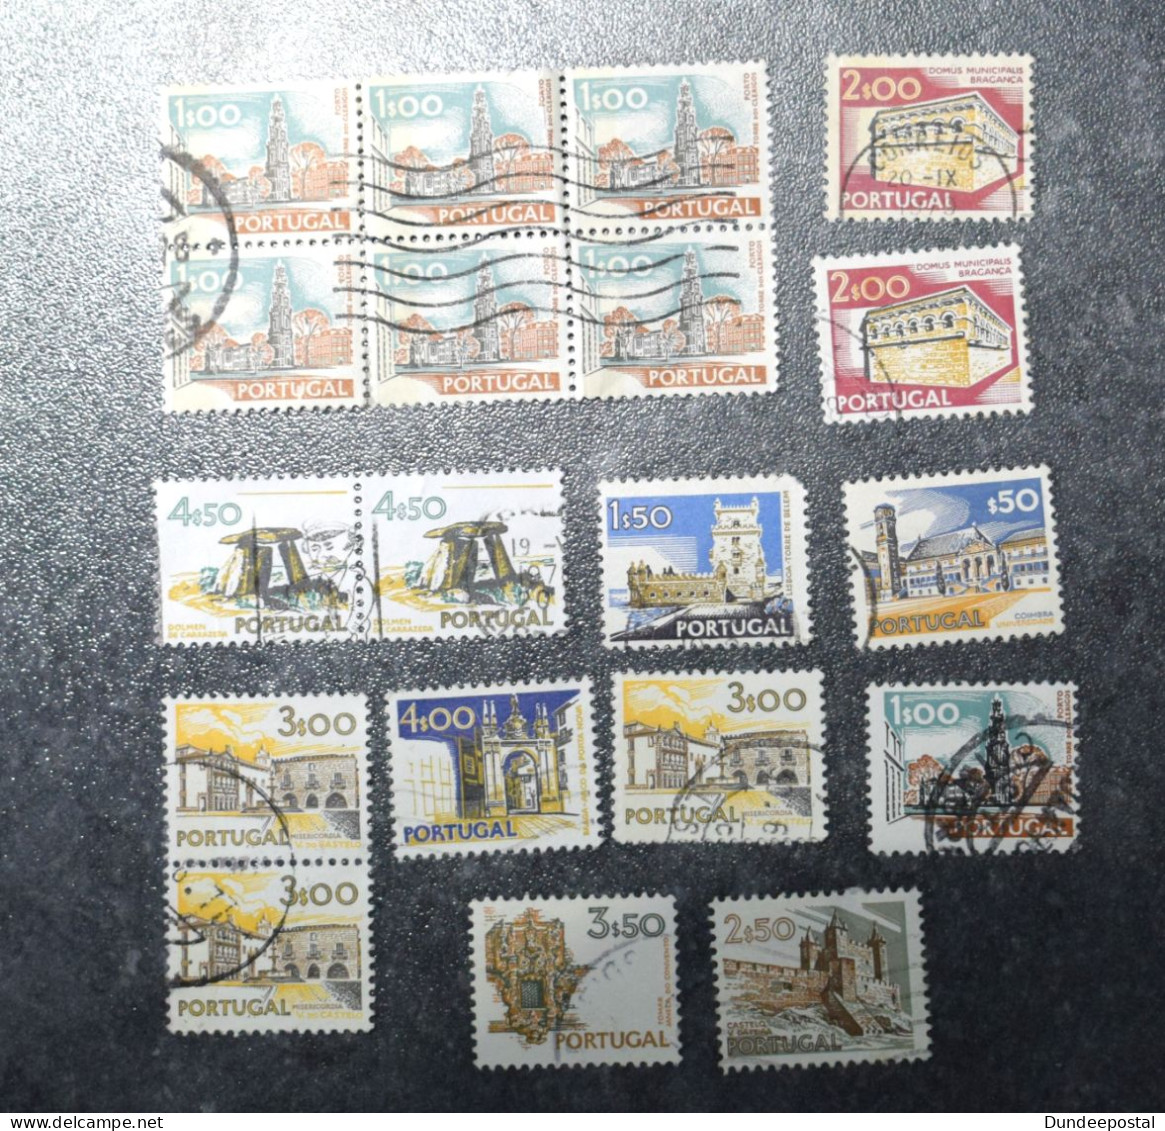 PORTUGAL STAMPS  Portugal Cities And Landscapes  1953 ~~L@@K~~ - Gebraucht